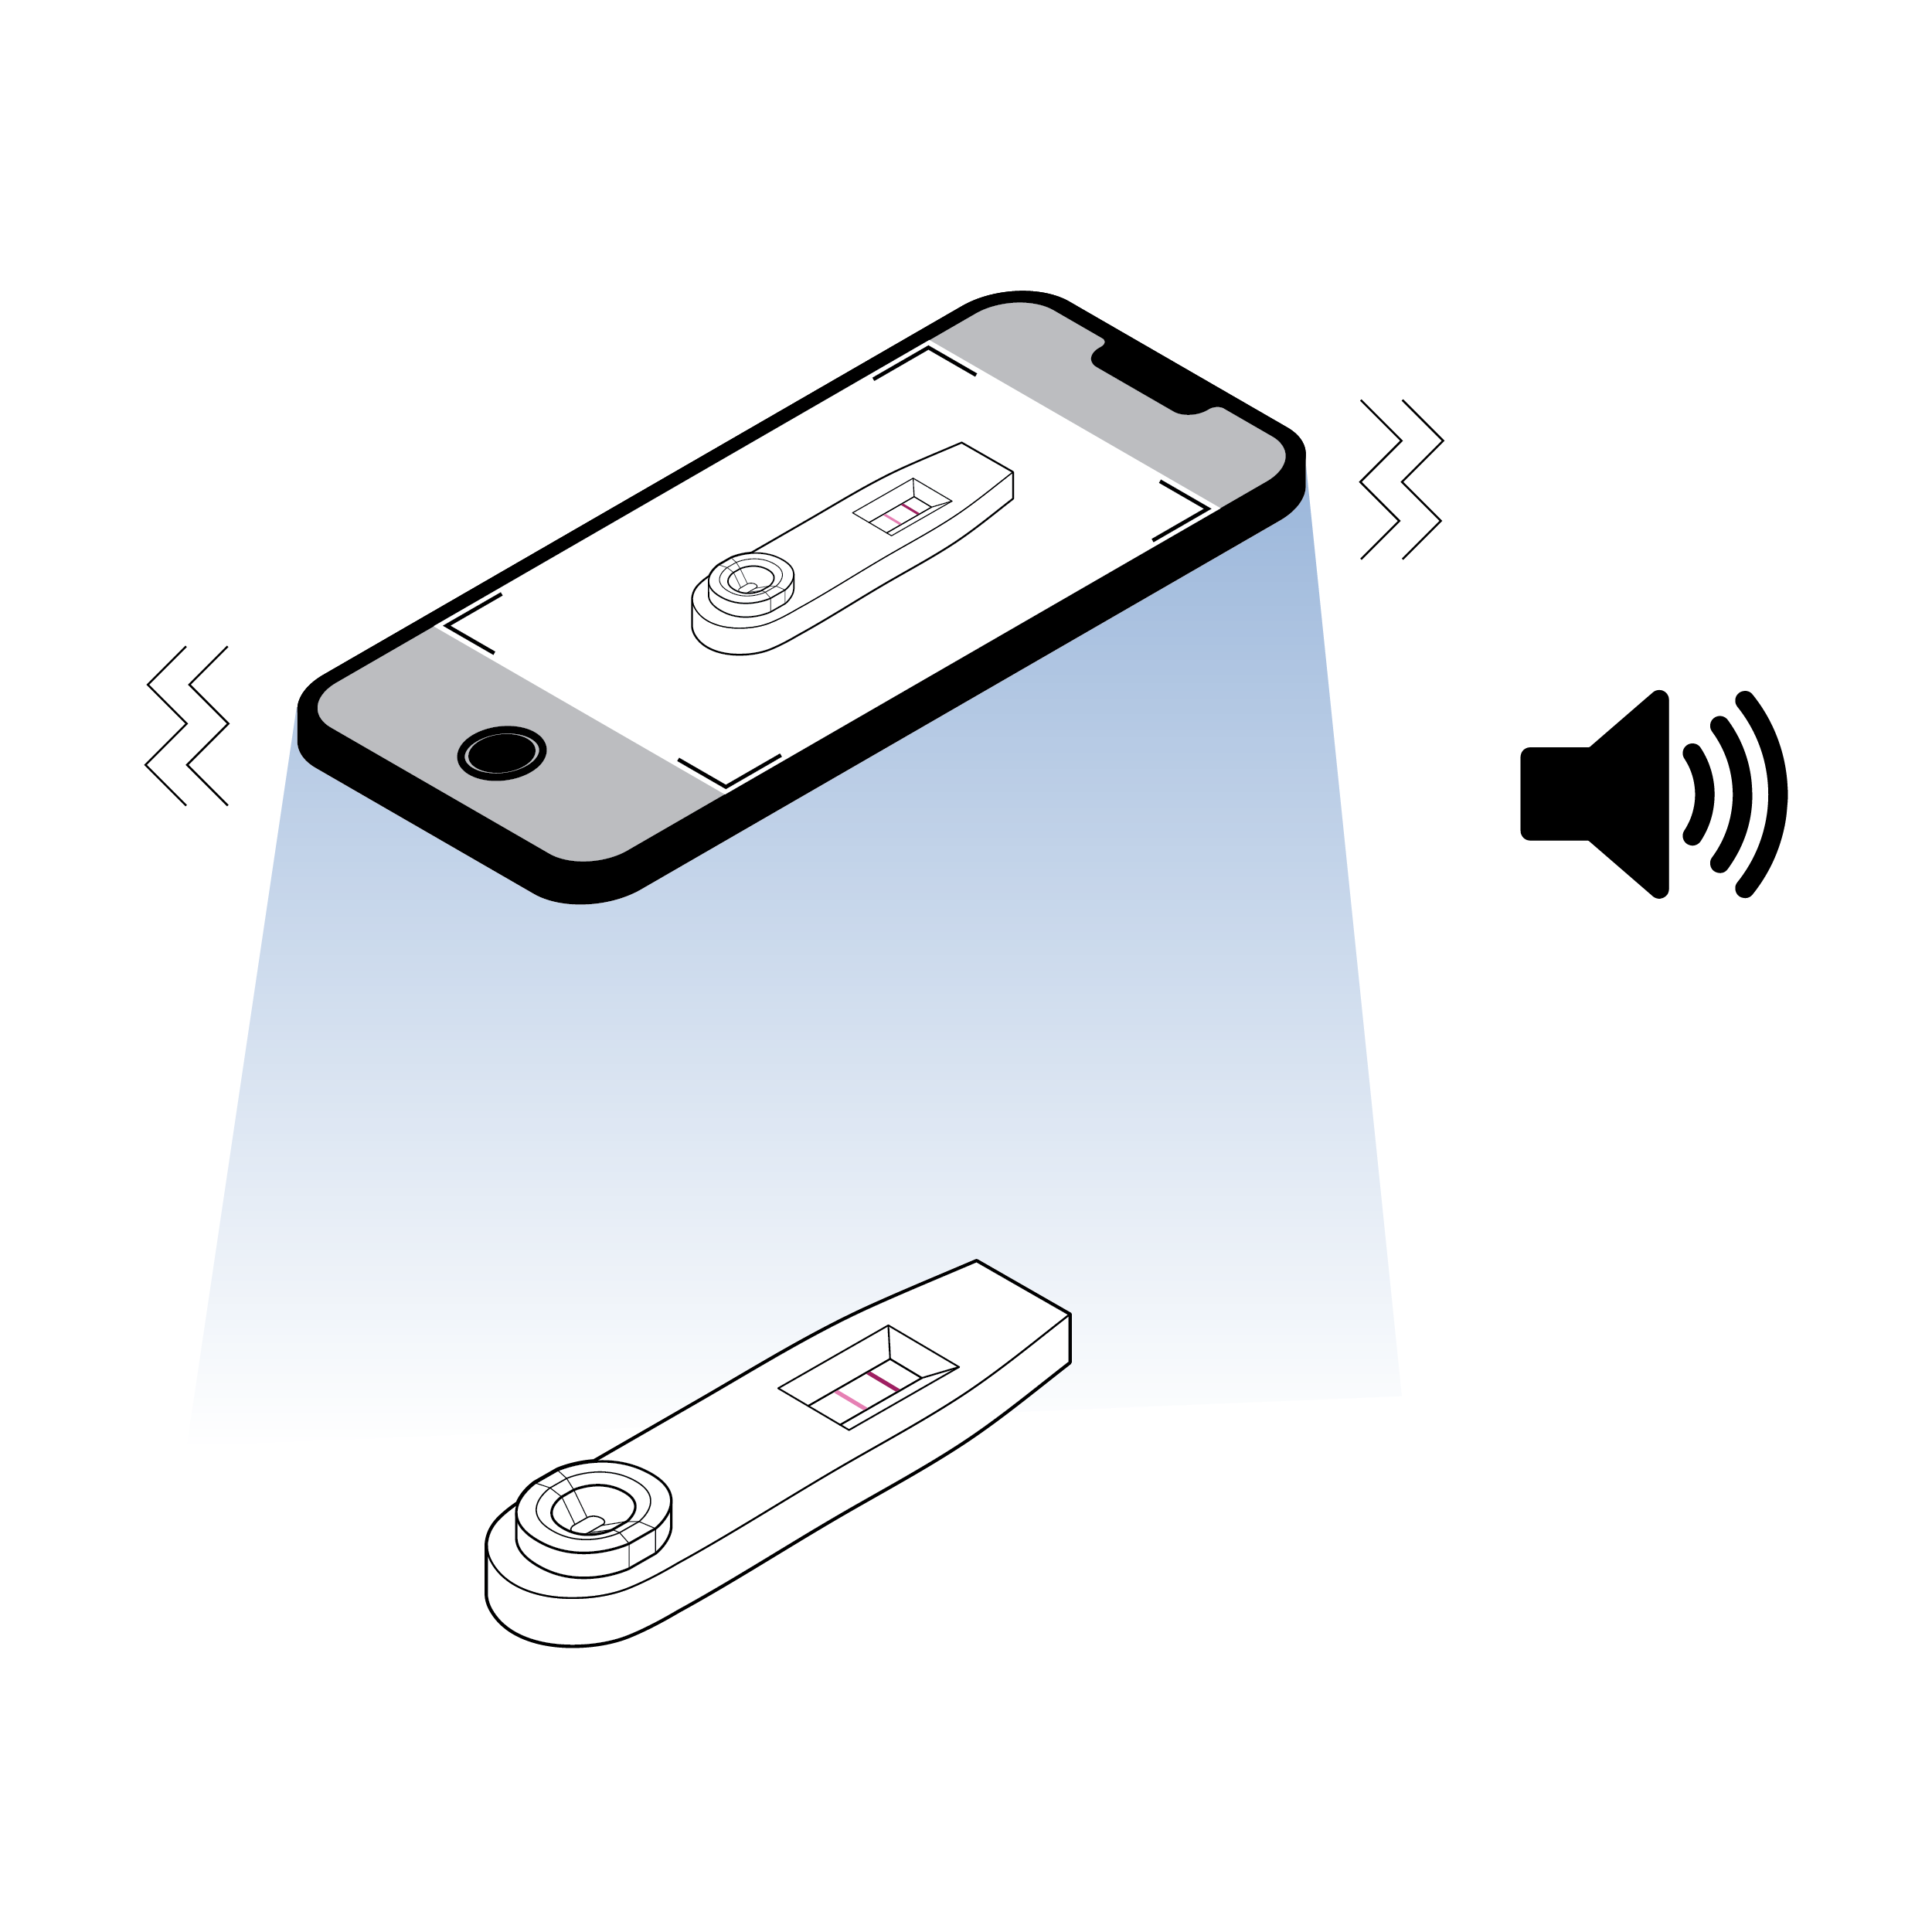 A mobile phone floats above a test cassette. Audio/sound and haptic or vibration symbols near the mobile phone indicate audible and dynamic physical feedback indicating camera alignment with the cassette.